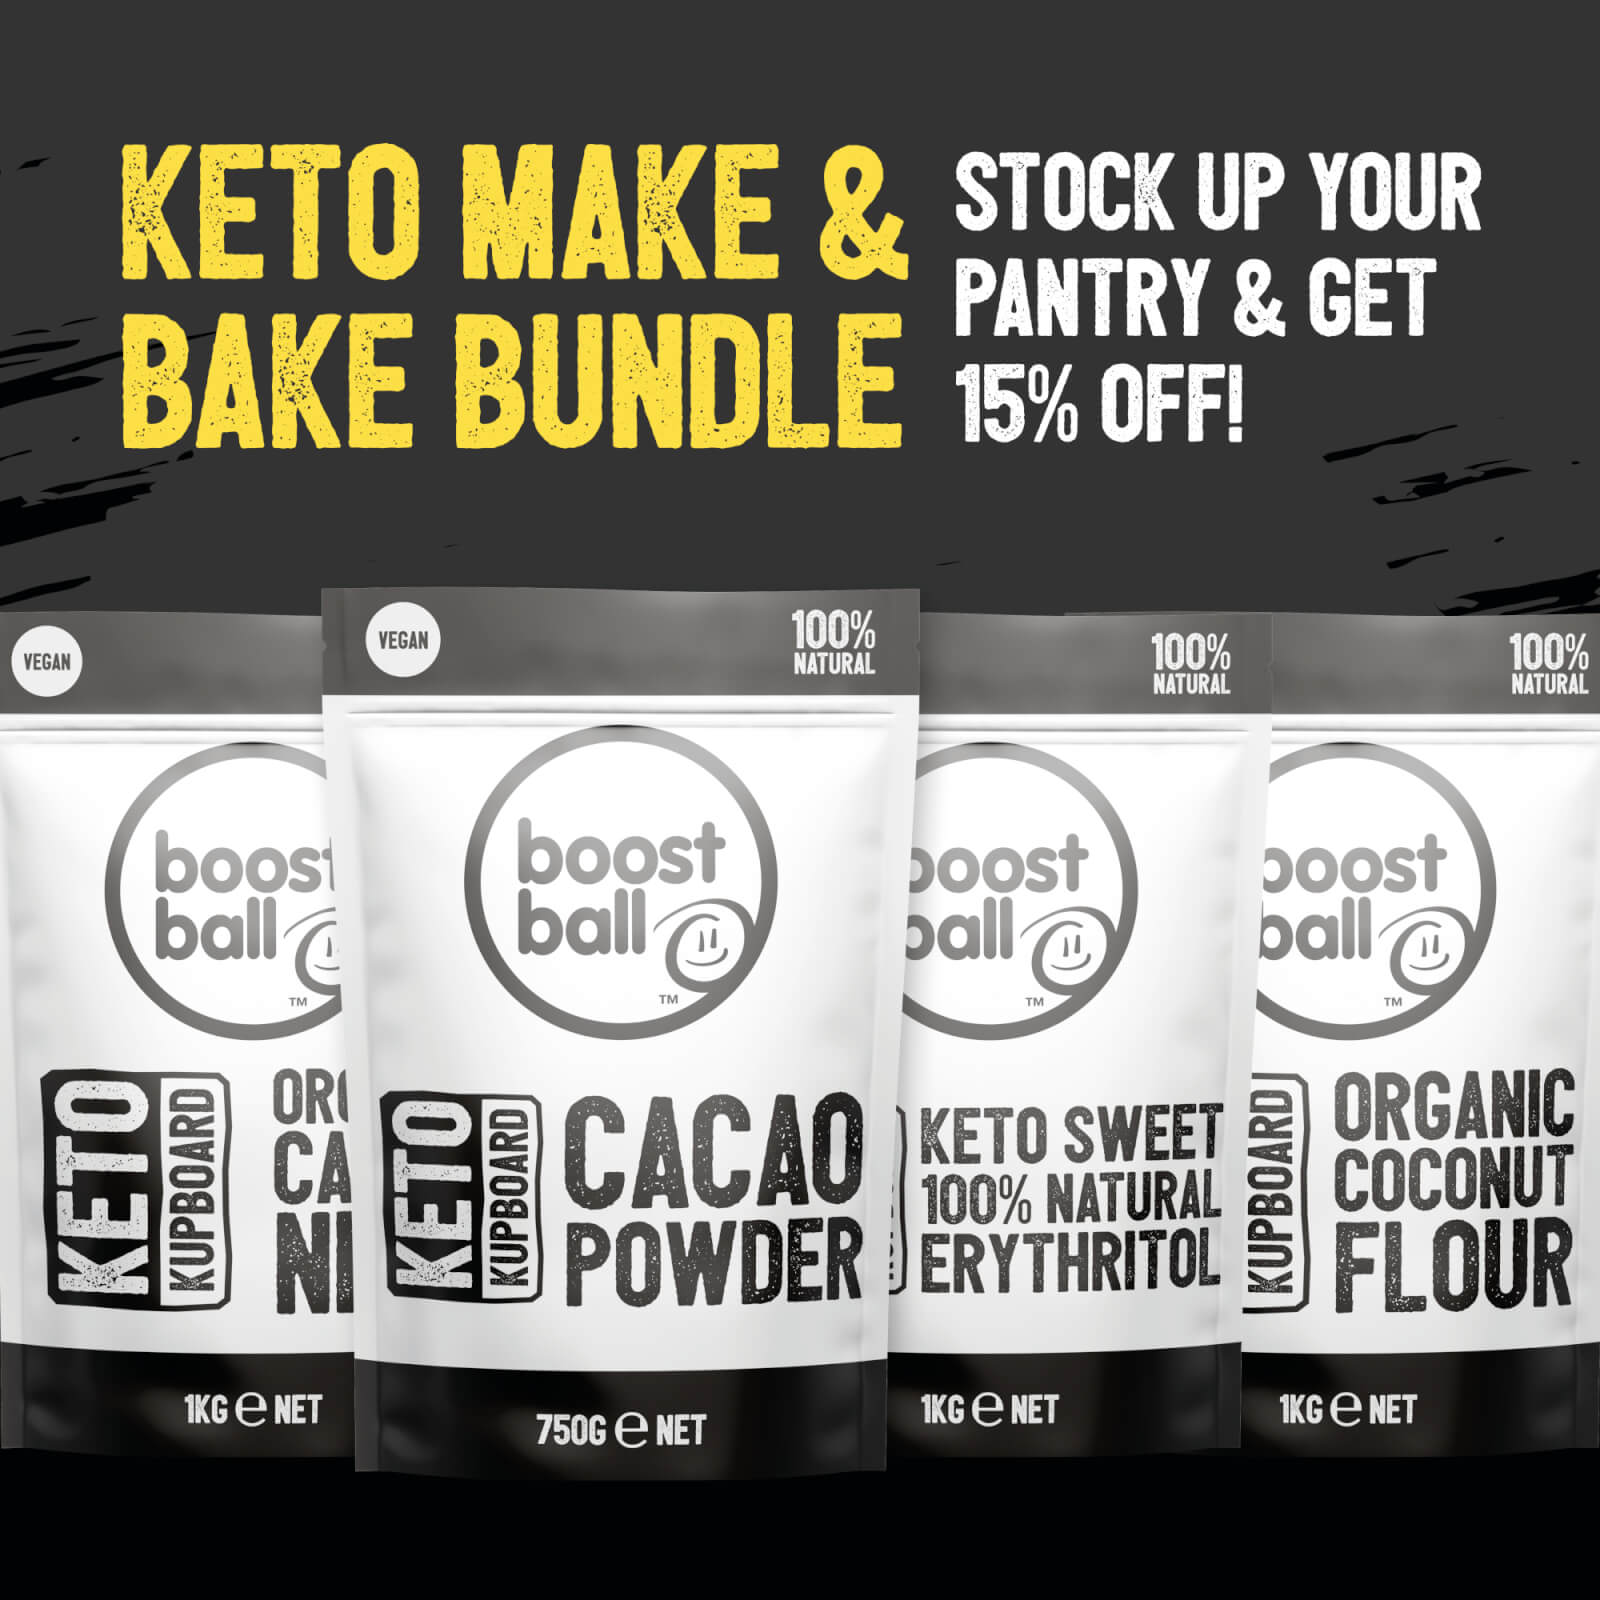 keto make and bake bundle stock up your pantry and get 15% off